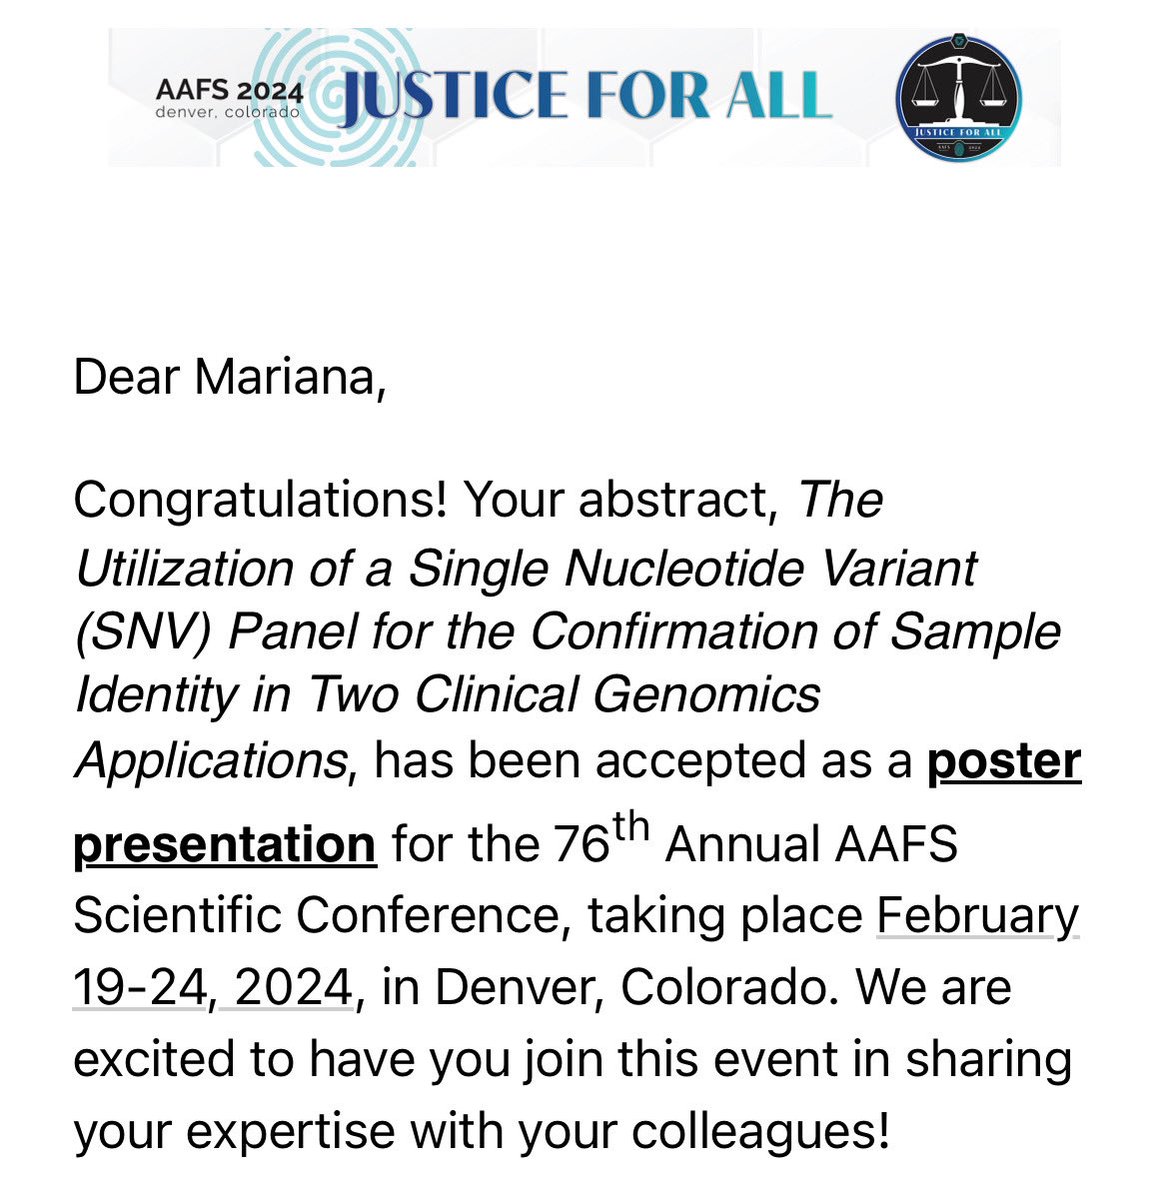 Congratulations to our PGY-4 and chief resident @rianavoudouri for her abstract acceptance and future poster presentation @The_AAFS #4n6 #forensicpath #PathTwitter #aafs24